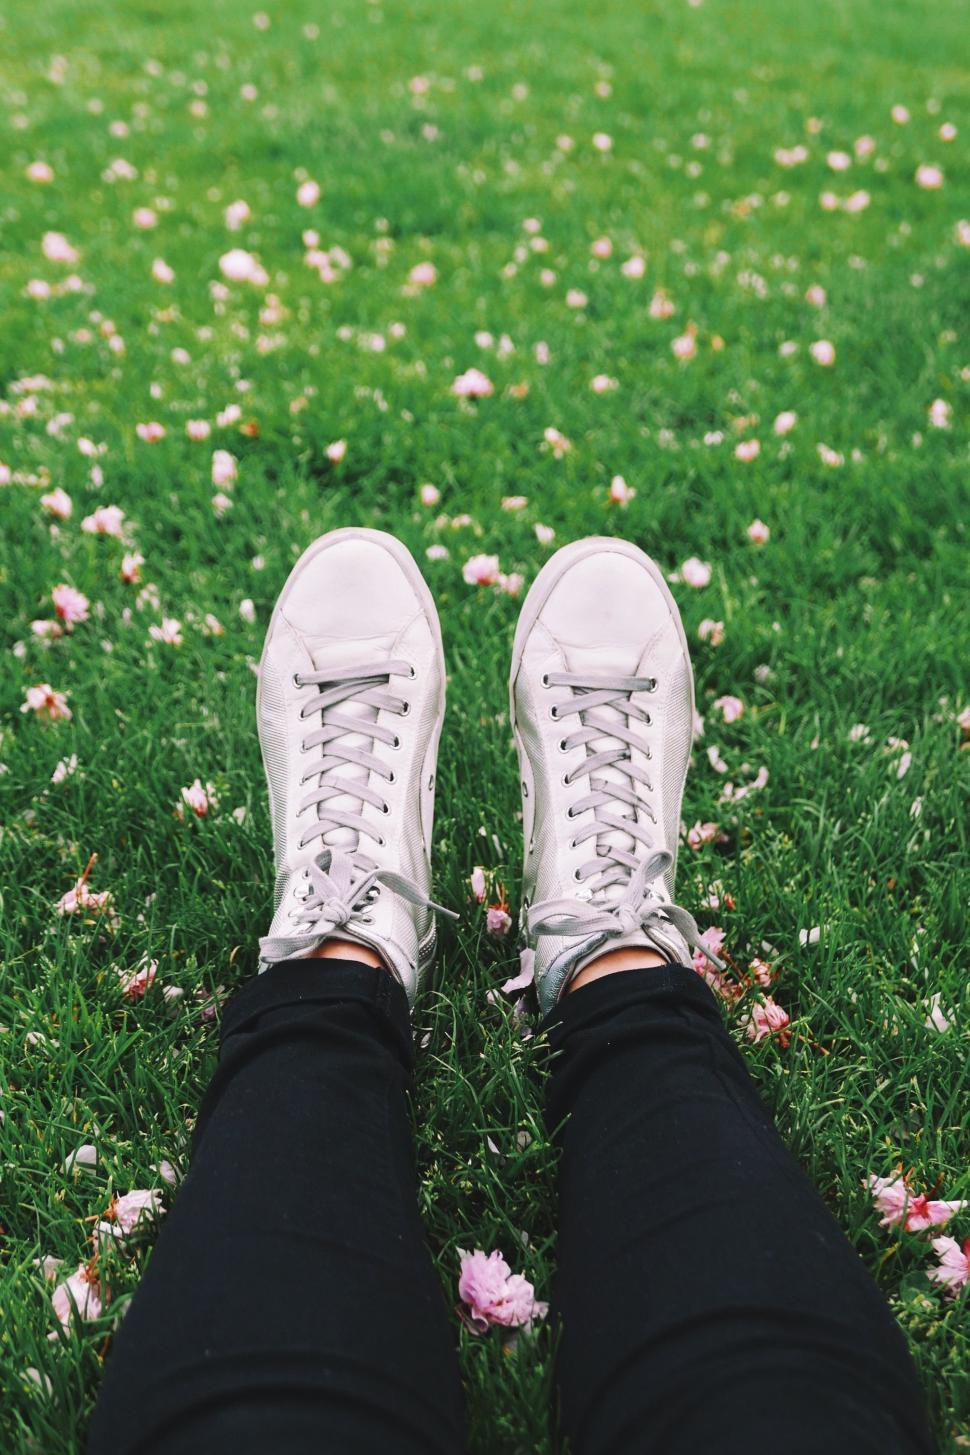 Free Image of Person in White Sneakers Standing in Grass 